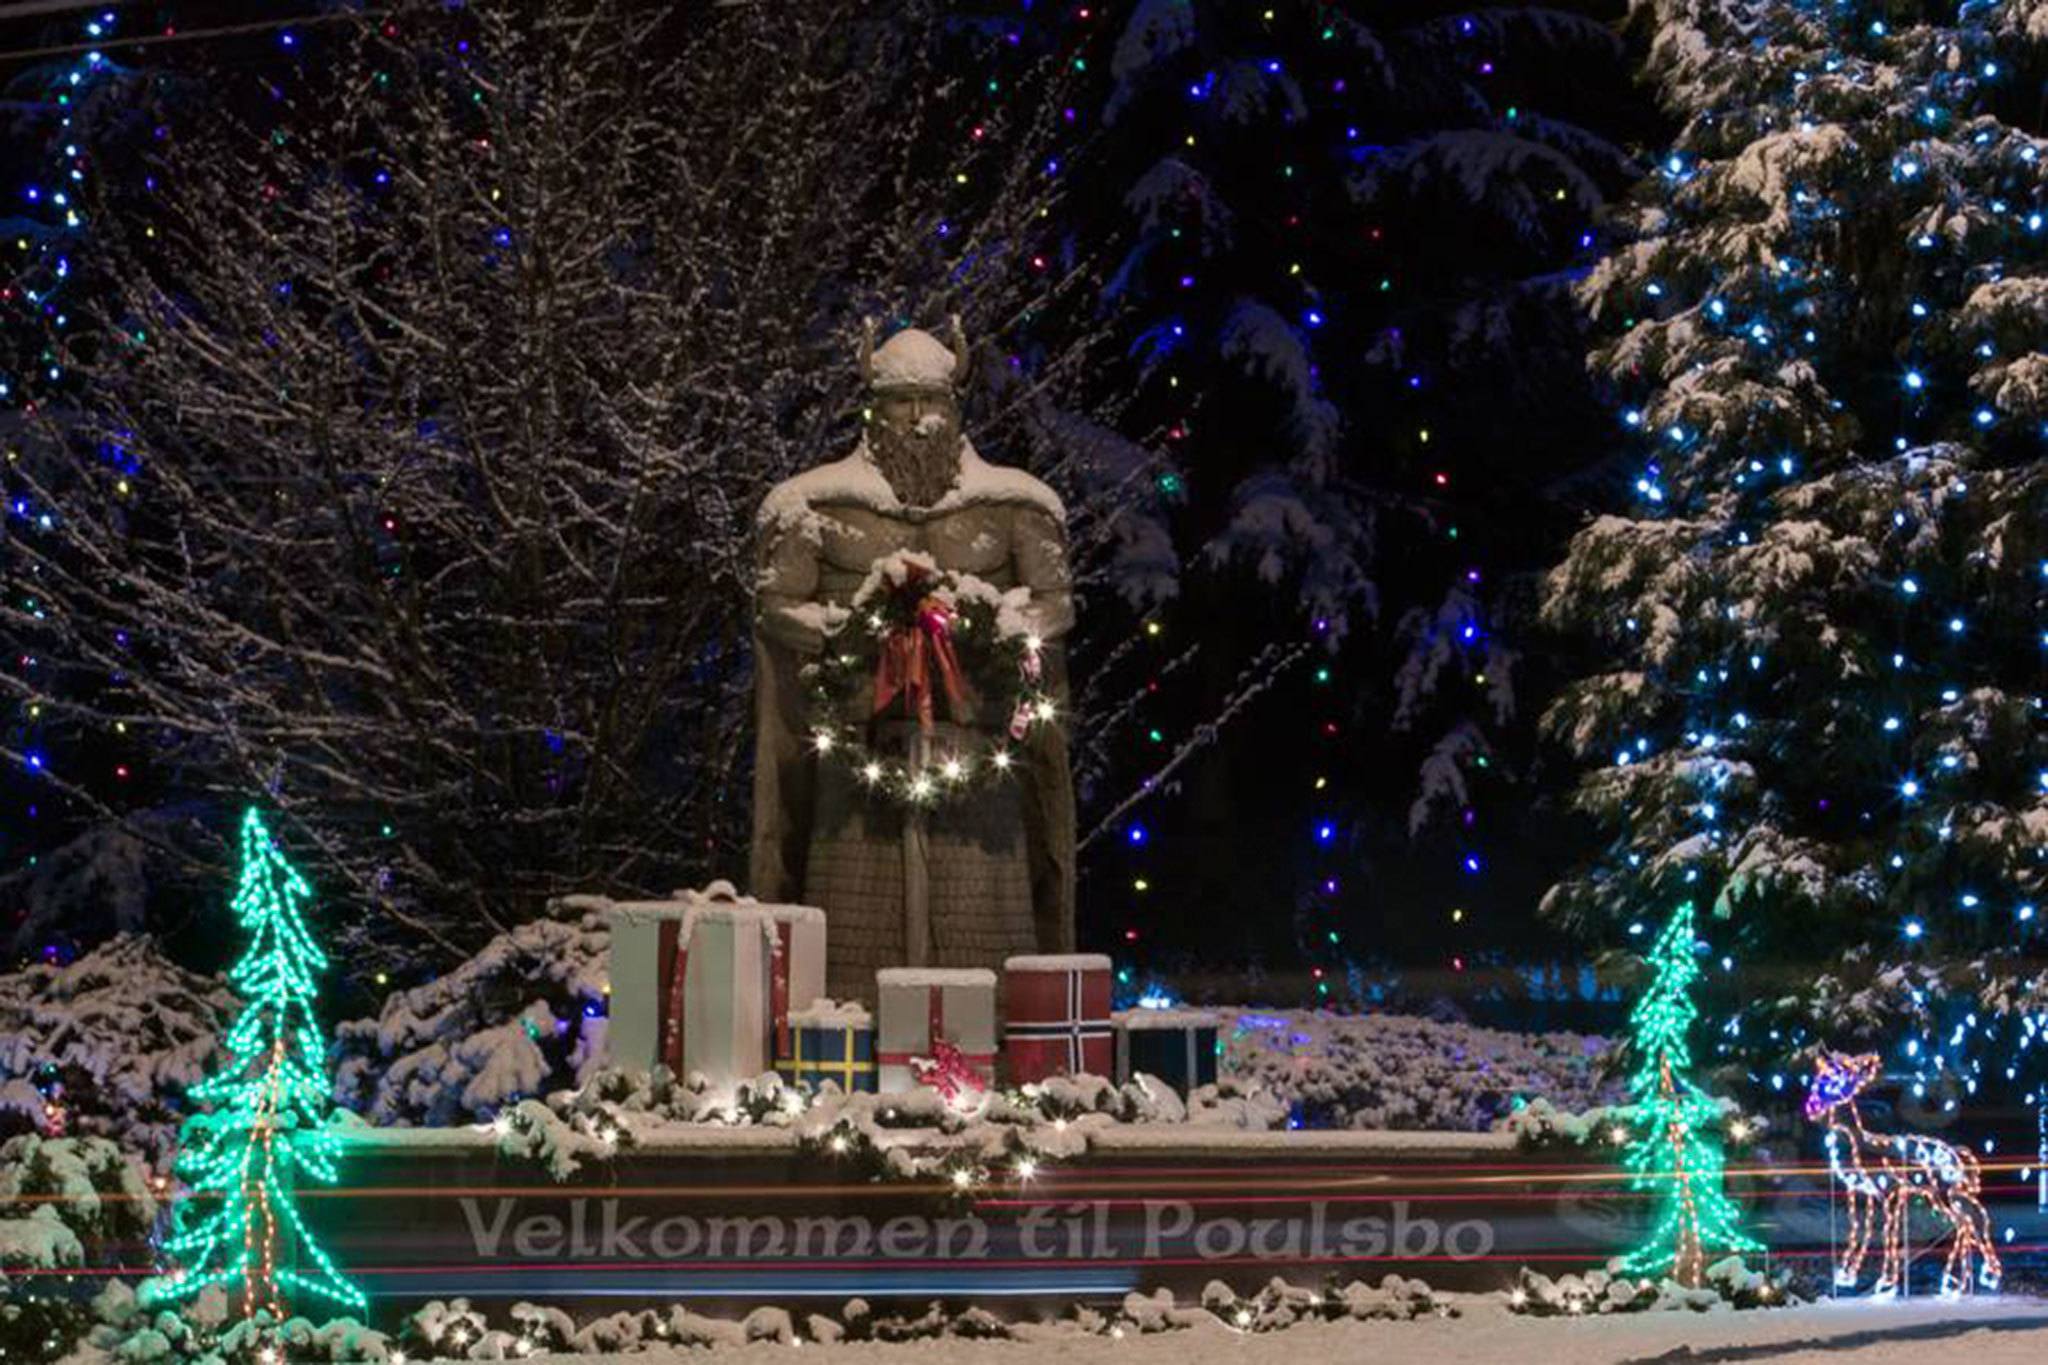 “White Christmas for Poulsbo Viking,” by Cindee Still